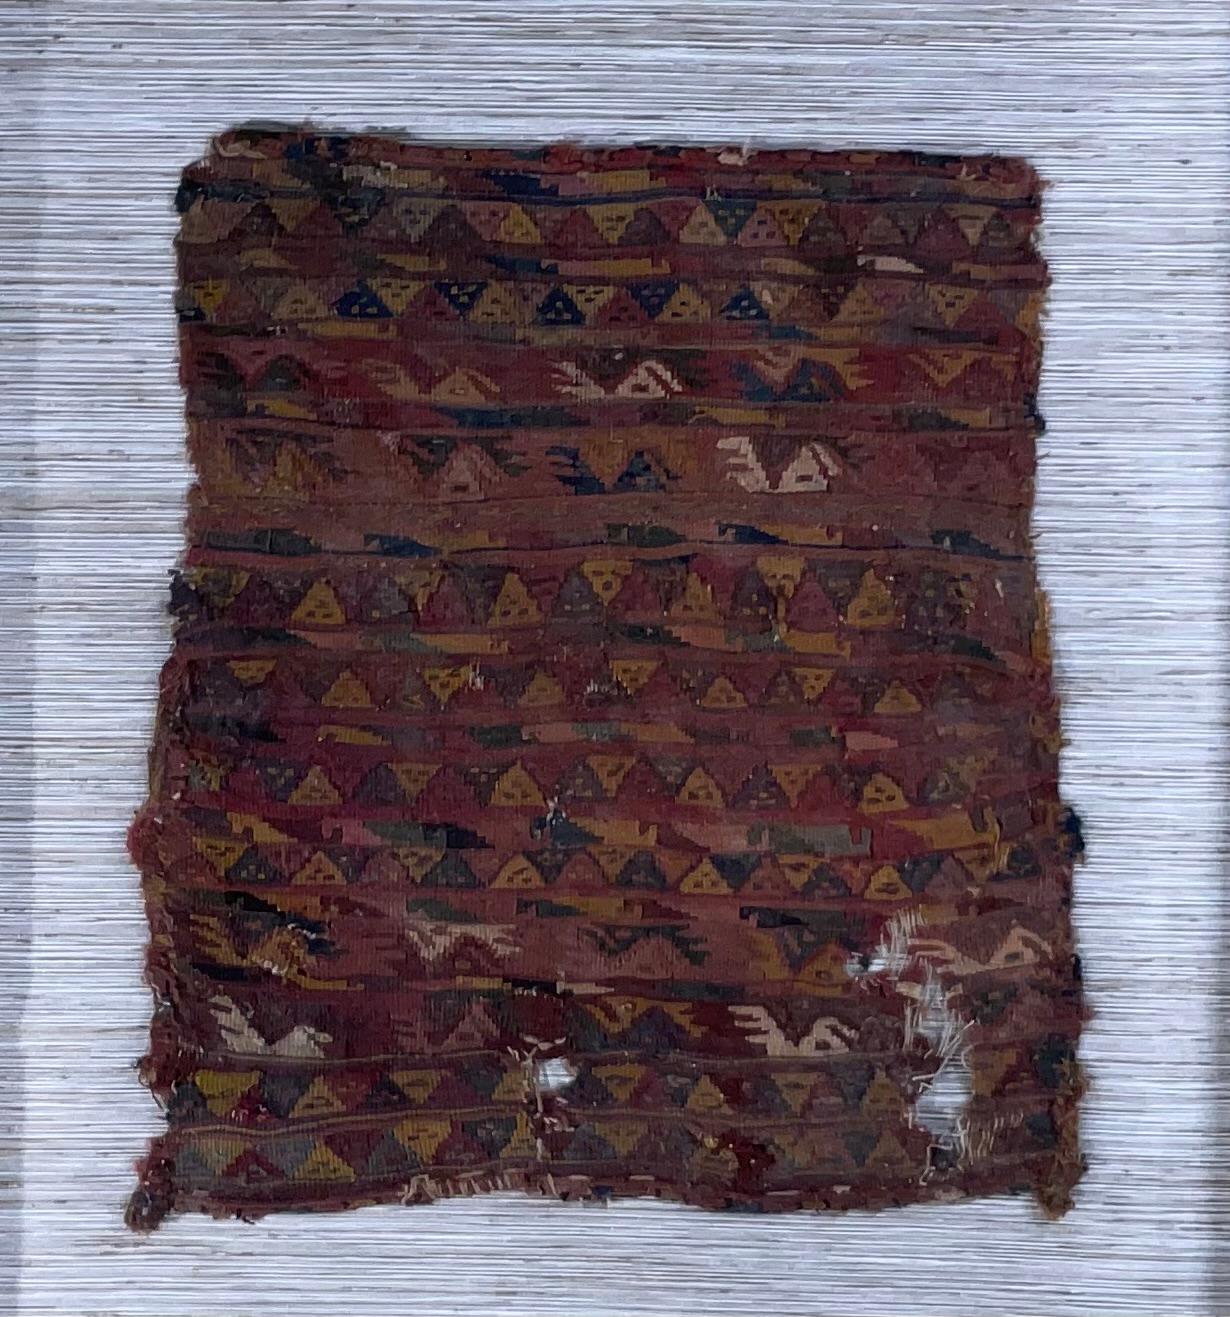 Museum quality handwoven textile fragment, featuring human faces  ,or geometric motifs , professionally mounted on cotton matte , in very decorative wood frame as shadows box . The textile dated from late horizon -early colonial AD 1476 to 1600 slit